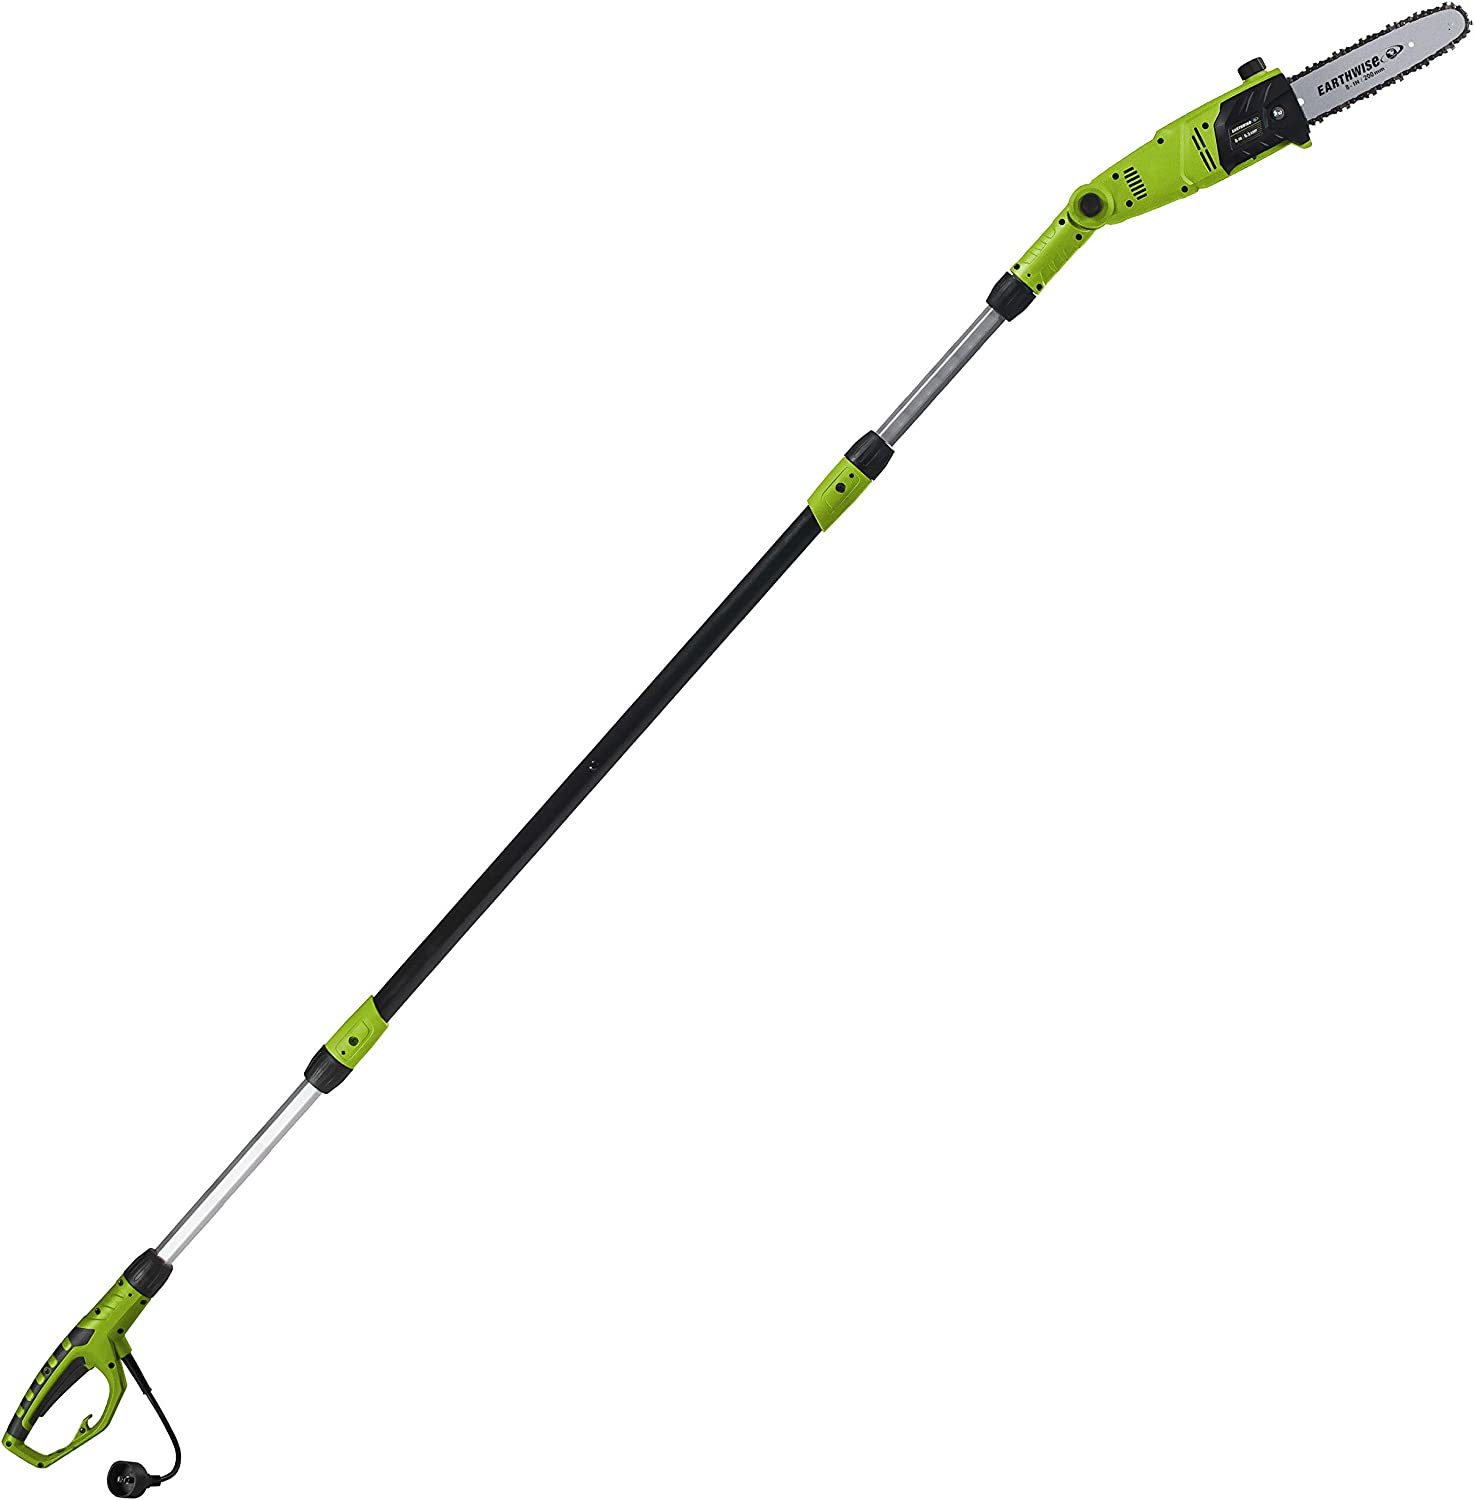 Earthwise PS44008 6.5-Amp 8-Inch Corded Electric Pole Saw, Green - $109.99